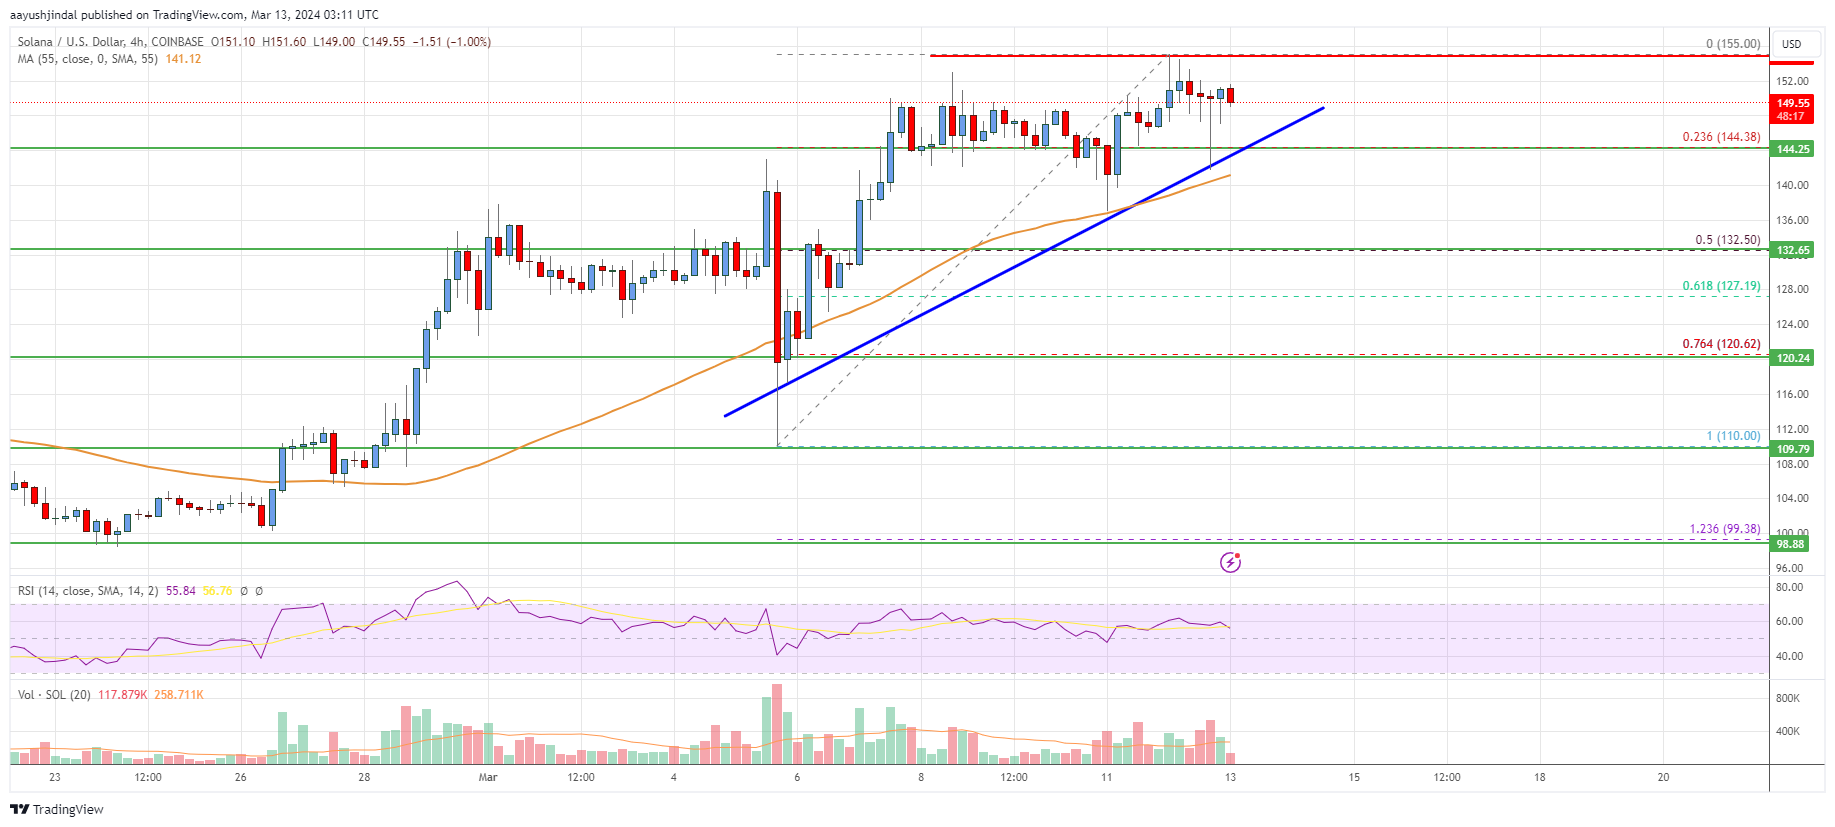 Solana (SOL) Price Analysis: Rally Could Extend To $170